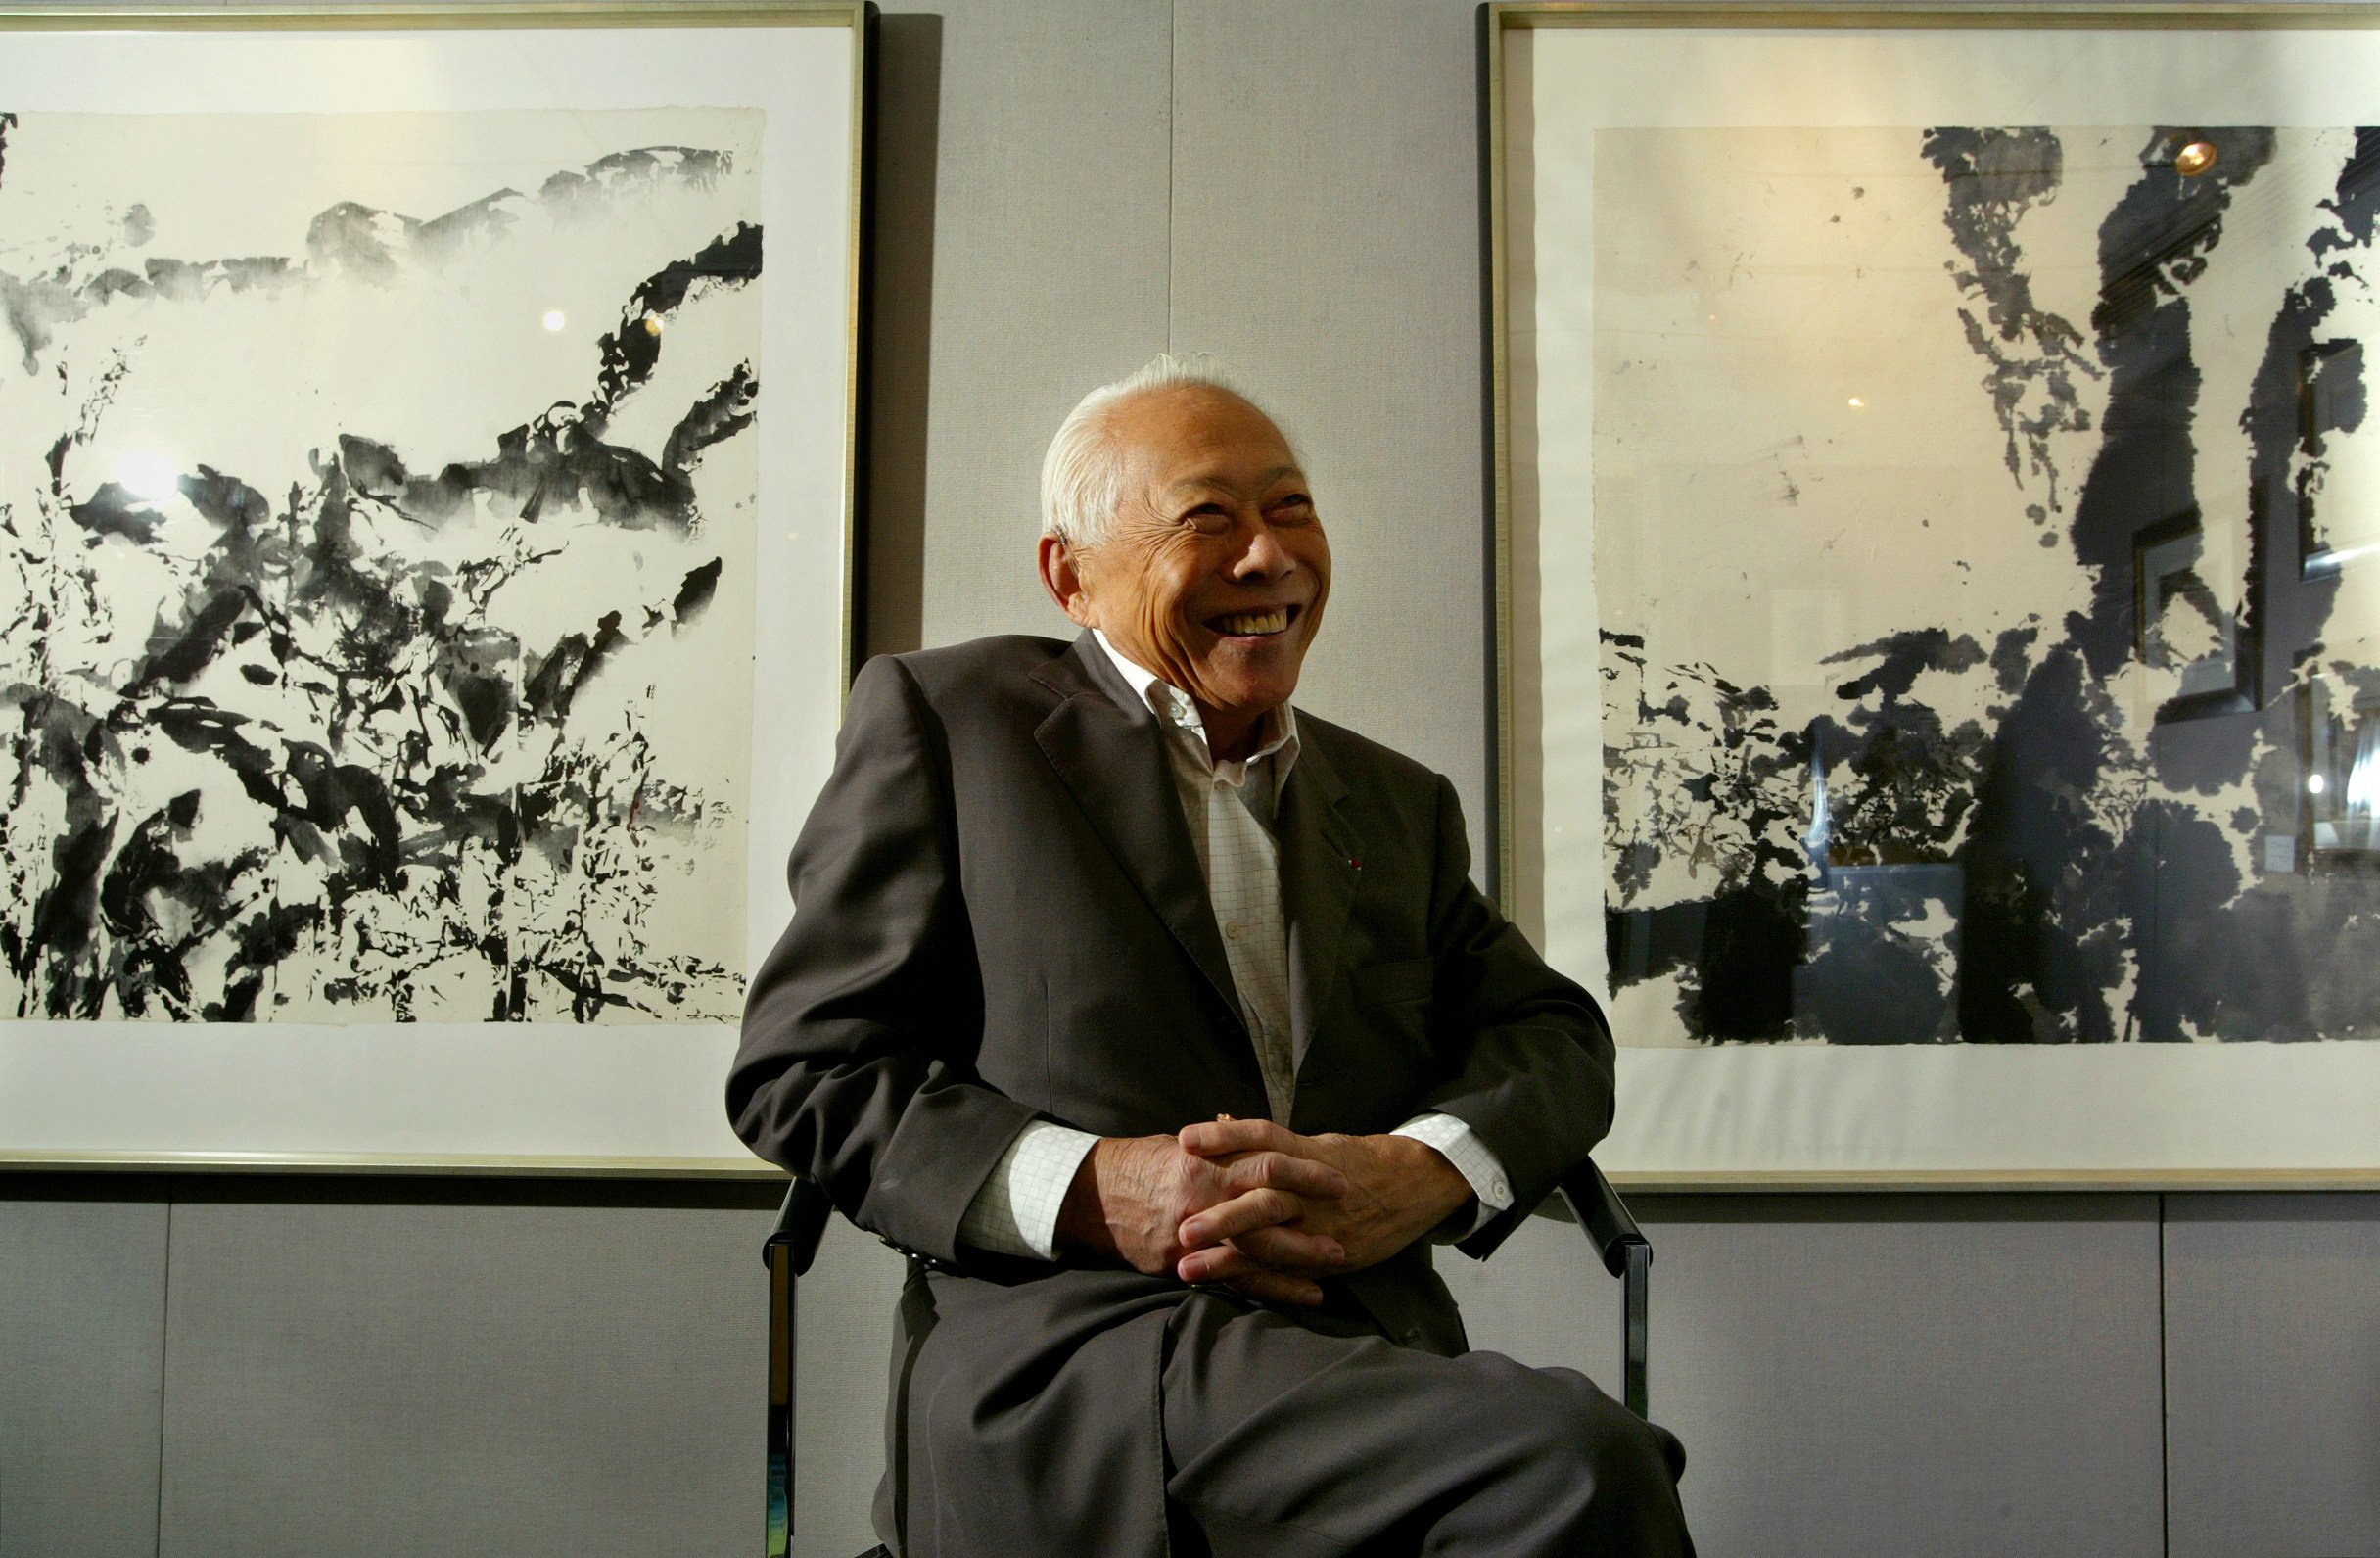 Zao Wou-ki at an exhibition of his work in Hong Kong in 2003. Sin-May Roy Zao, the daughter of Zao’s second wife, Chan May-kan, has donated 12 of his works to Hong Kong’s M+ museum of visual culture. Photo: SCMP